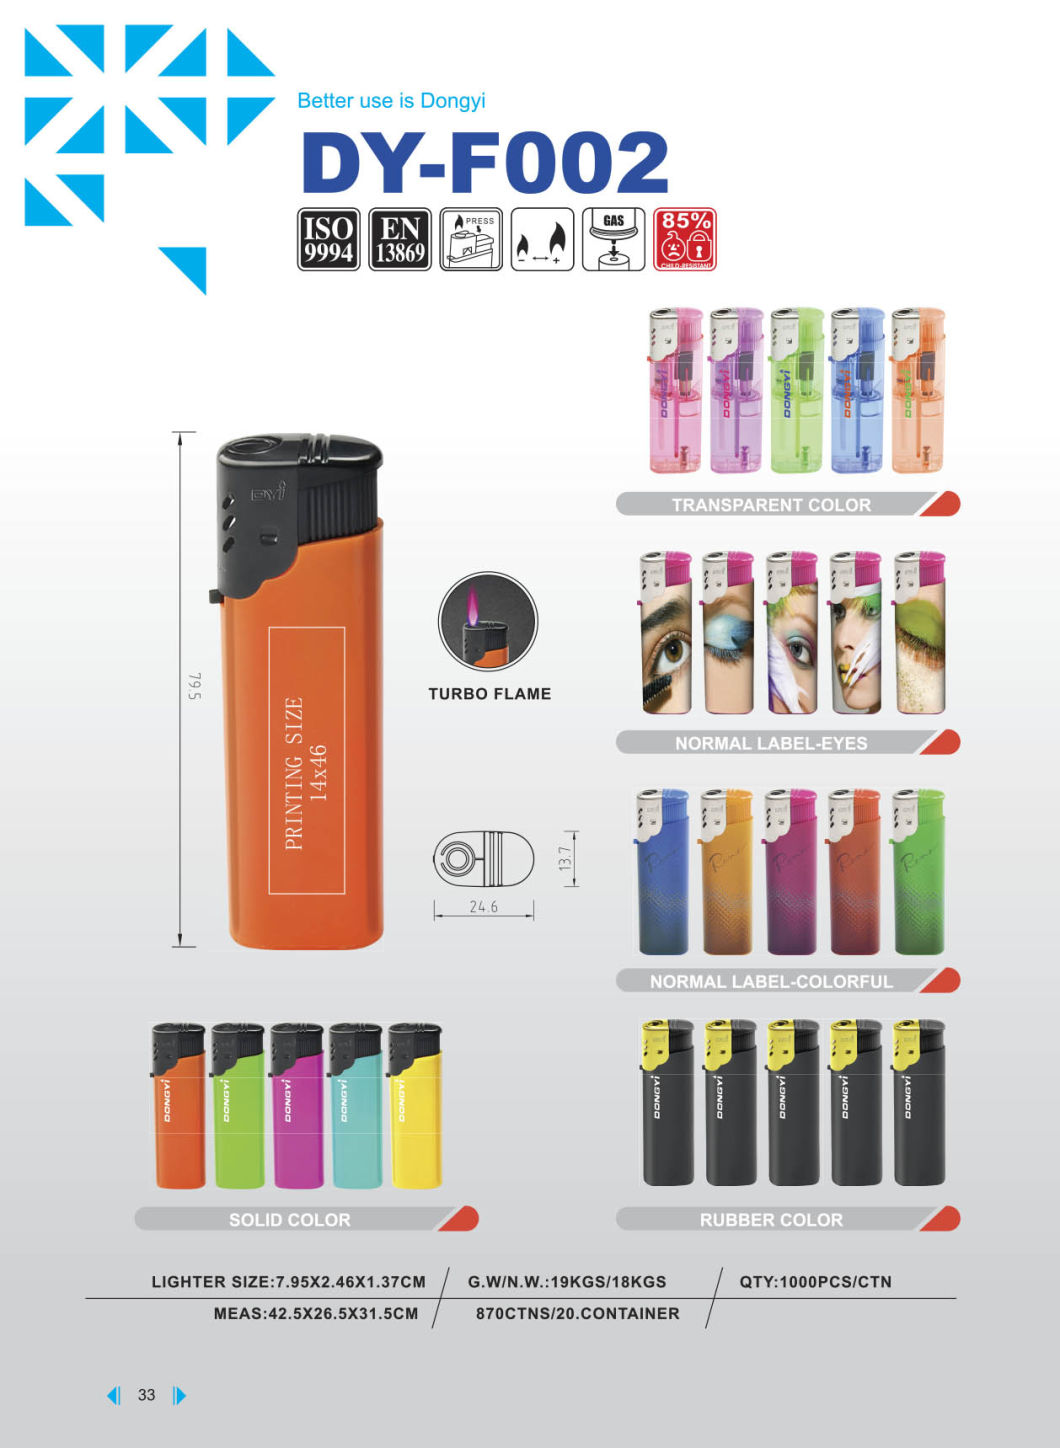 Hunan Dongyi High Quality Colorful Windproof Gas Lighter Dy-F002